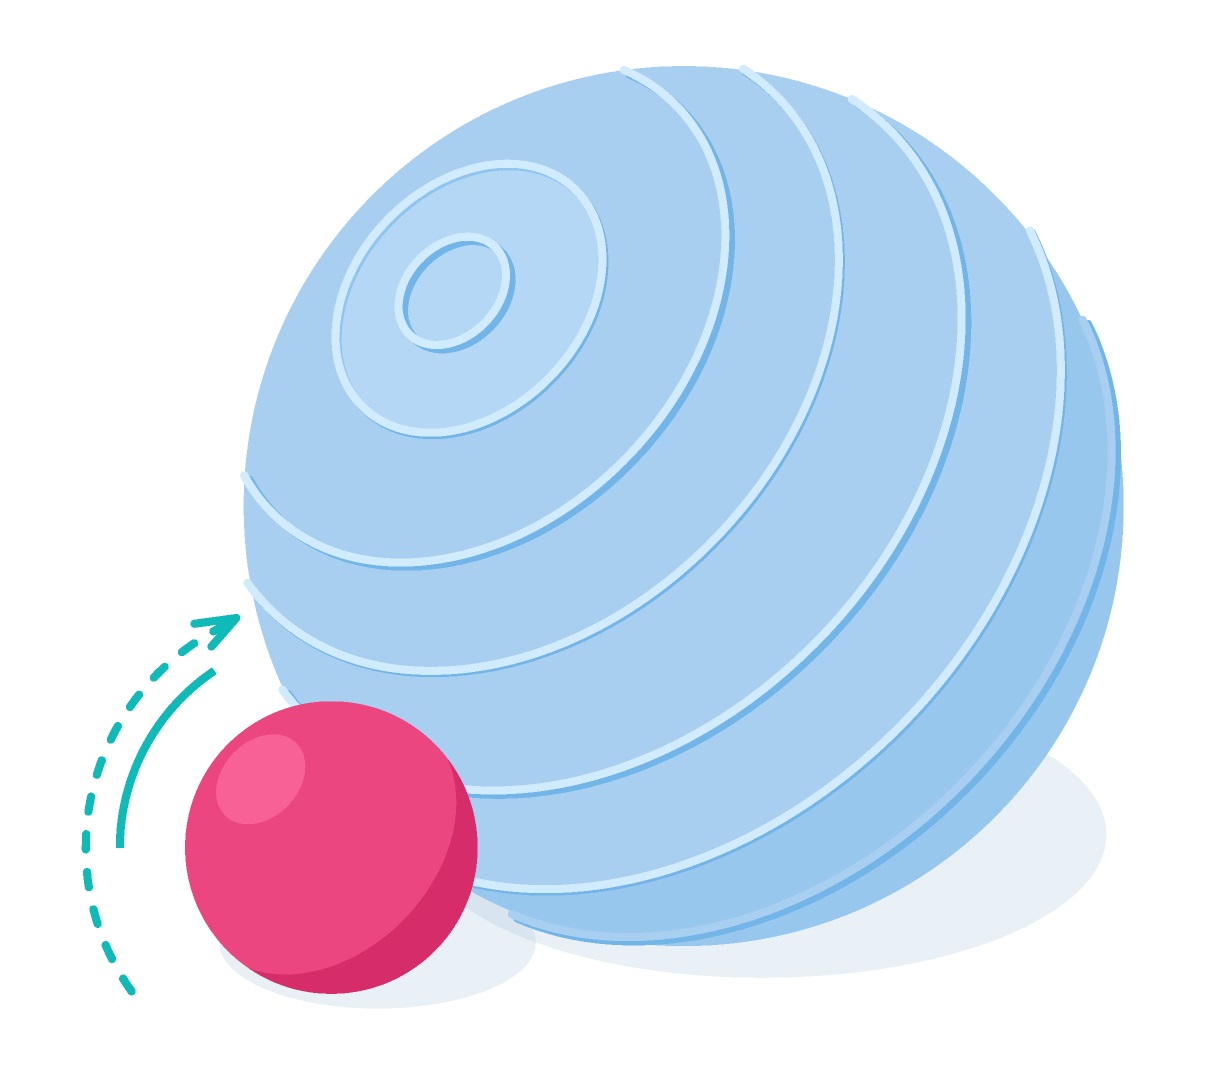 A blue ball and a pink ball on a white background.